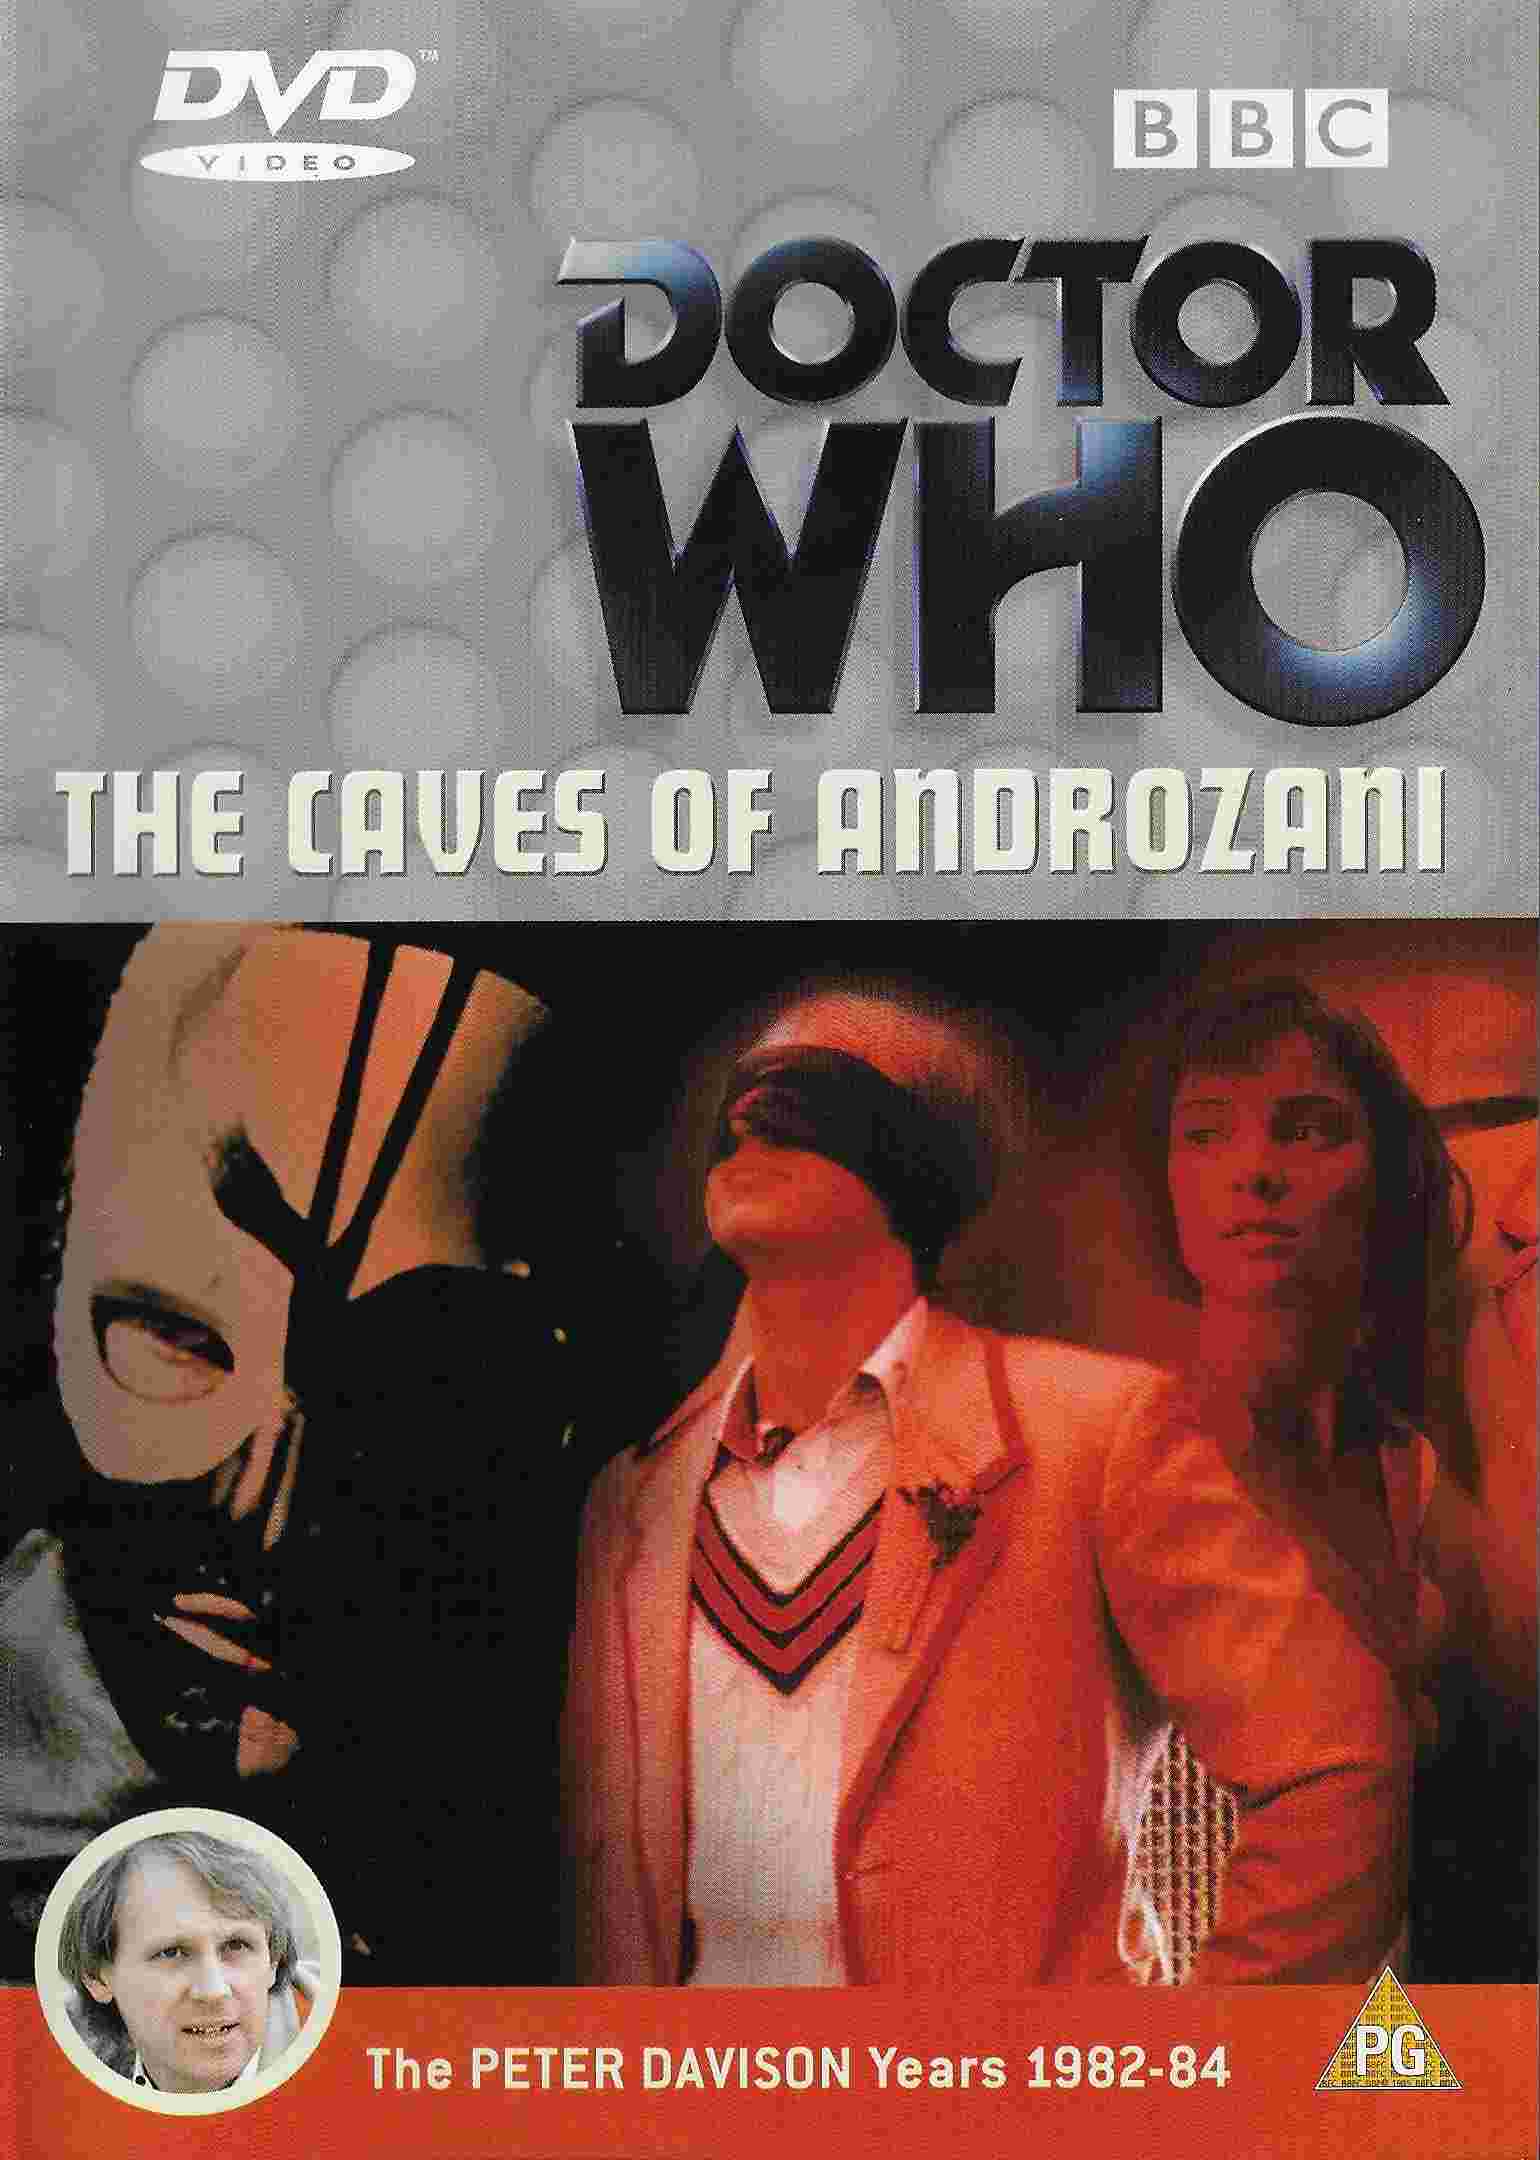 Picture of BBCDVD 1042 Doctor Who - The caves of Androzani by artist Robert Holmes from the BBC dvds - Records and Tapes library